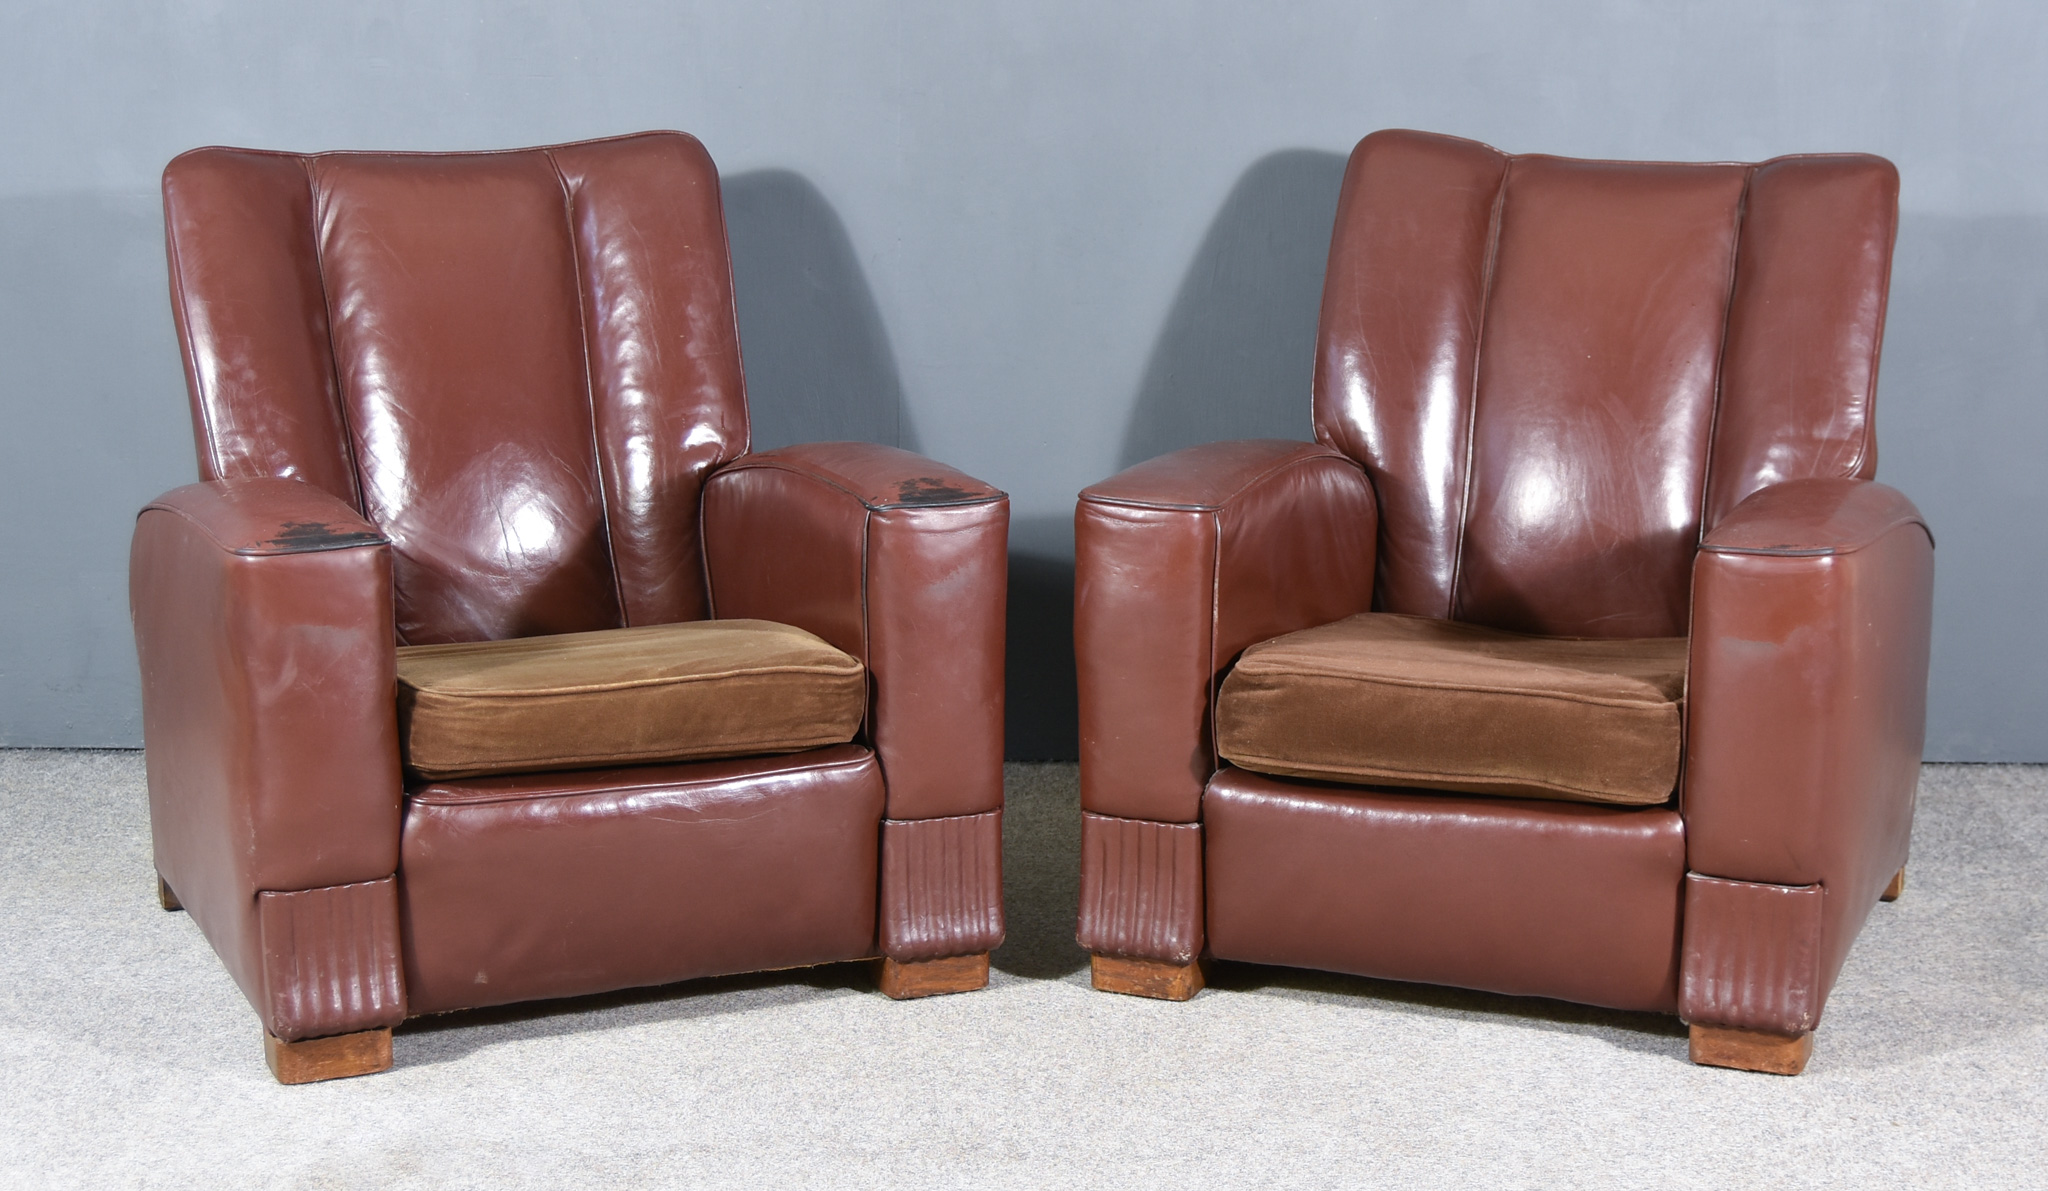 A Pair of Early 20th Century Square Back Easy Chairs of Art Deco Design, upholstered in brown